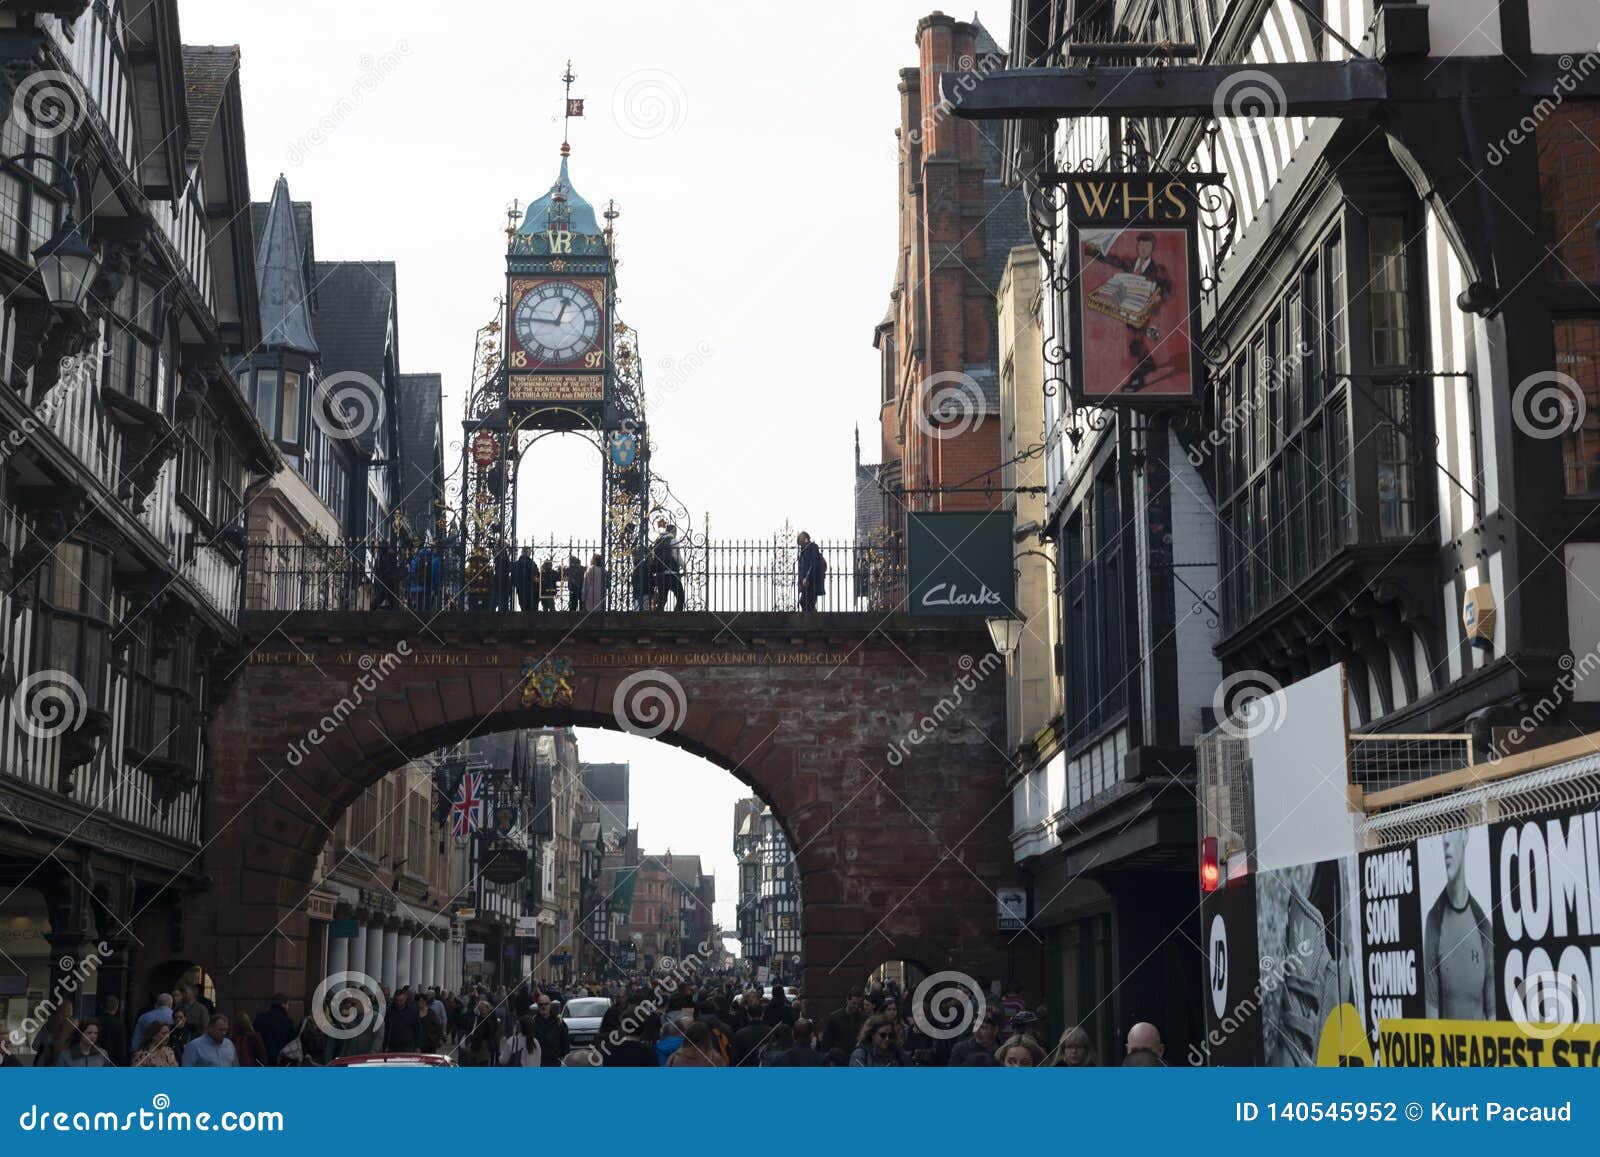 Iconic Clock Tower Of Chester Editorial 